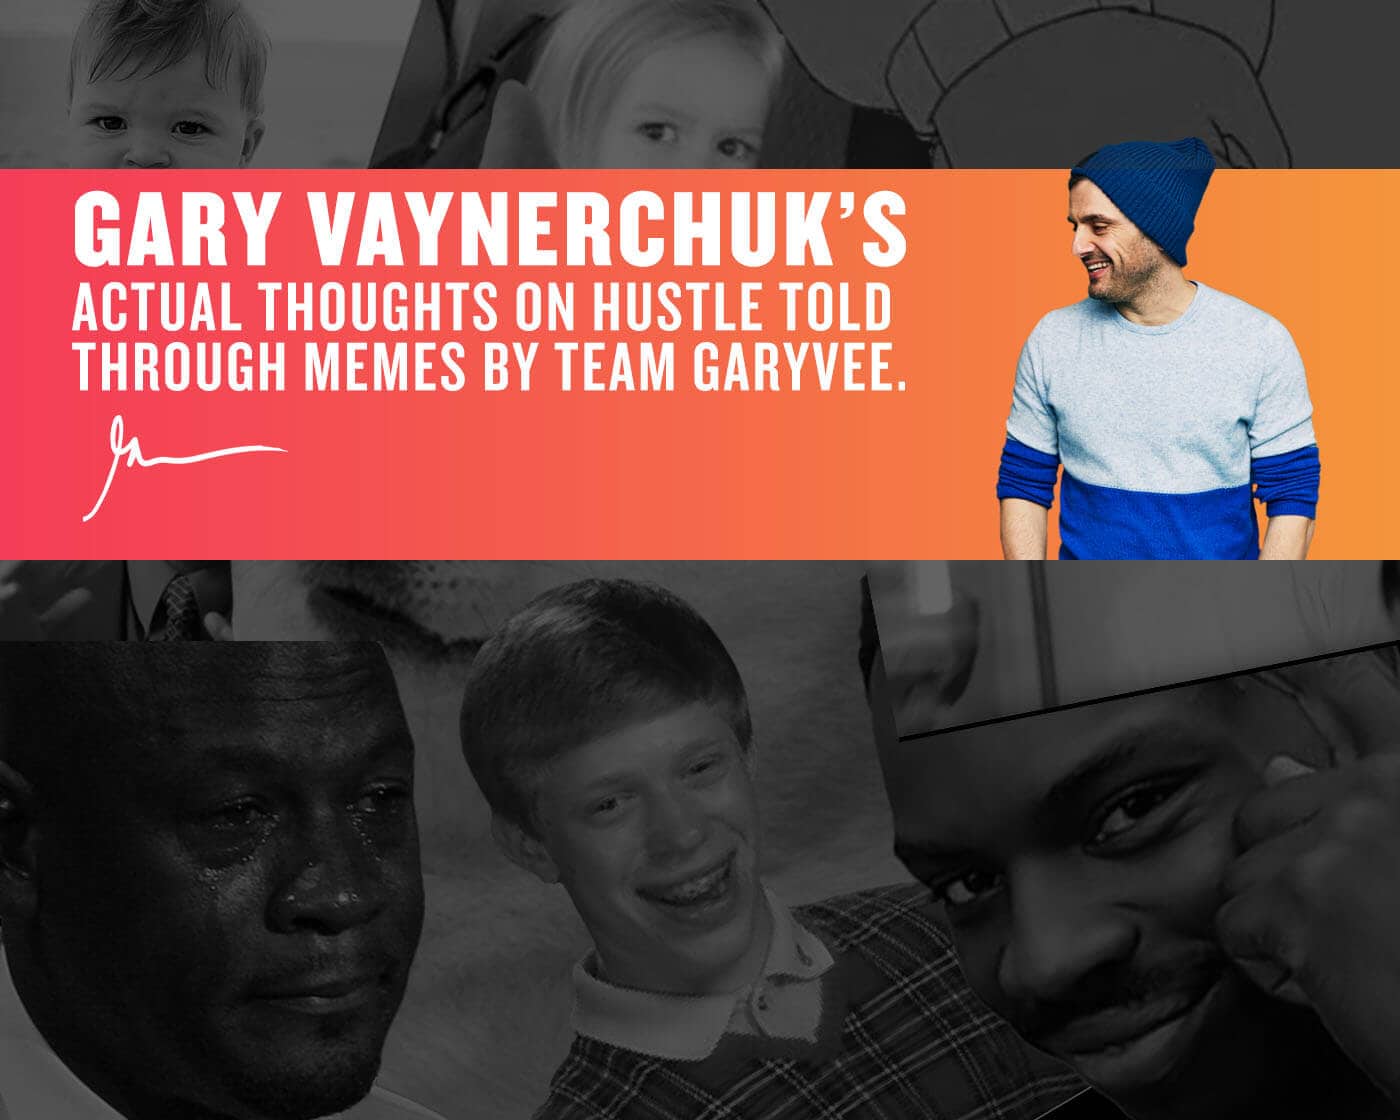 Gary Vaynerchuk’s Actual Thoughts on Hustle (Told Through Memes)